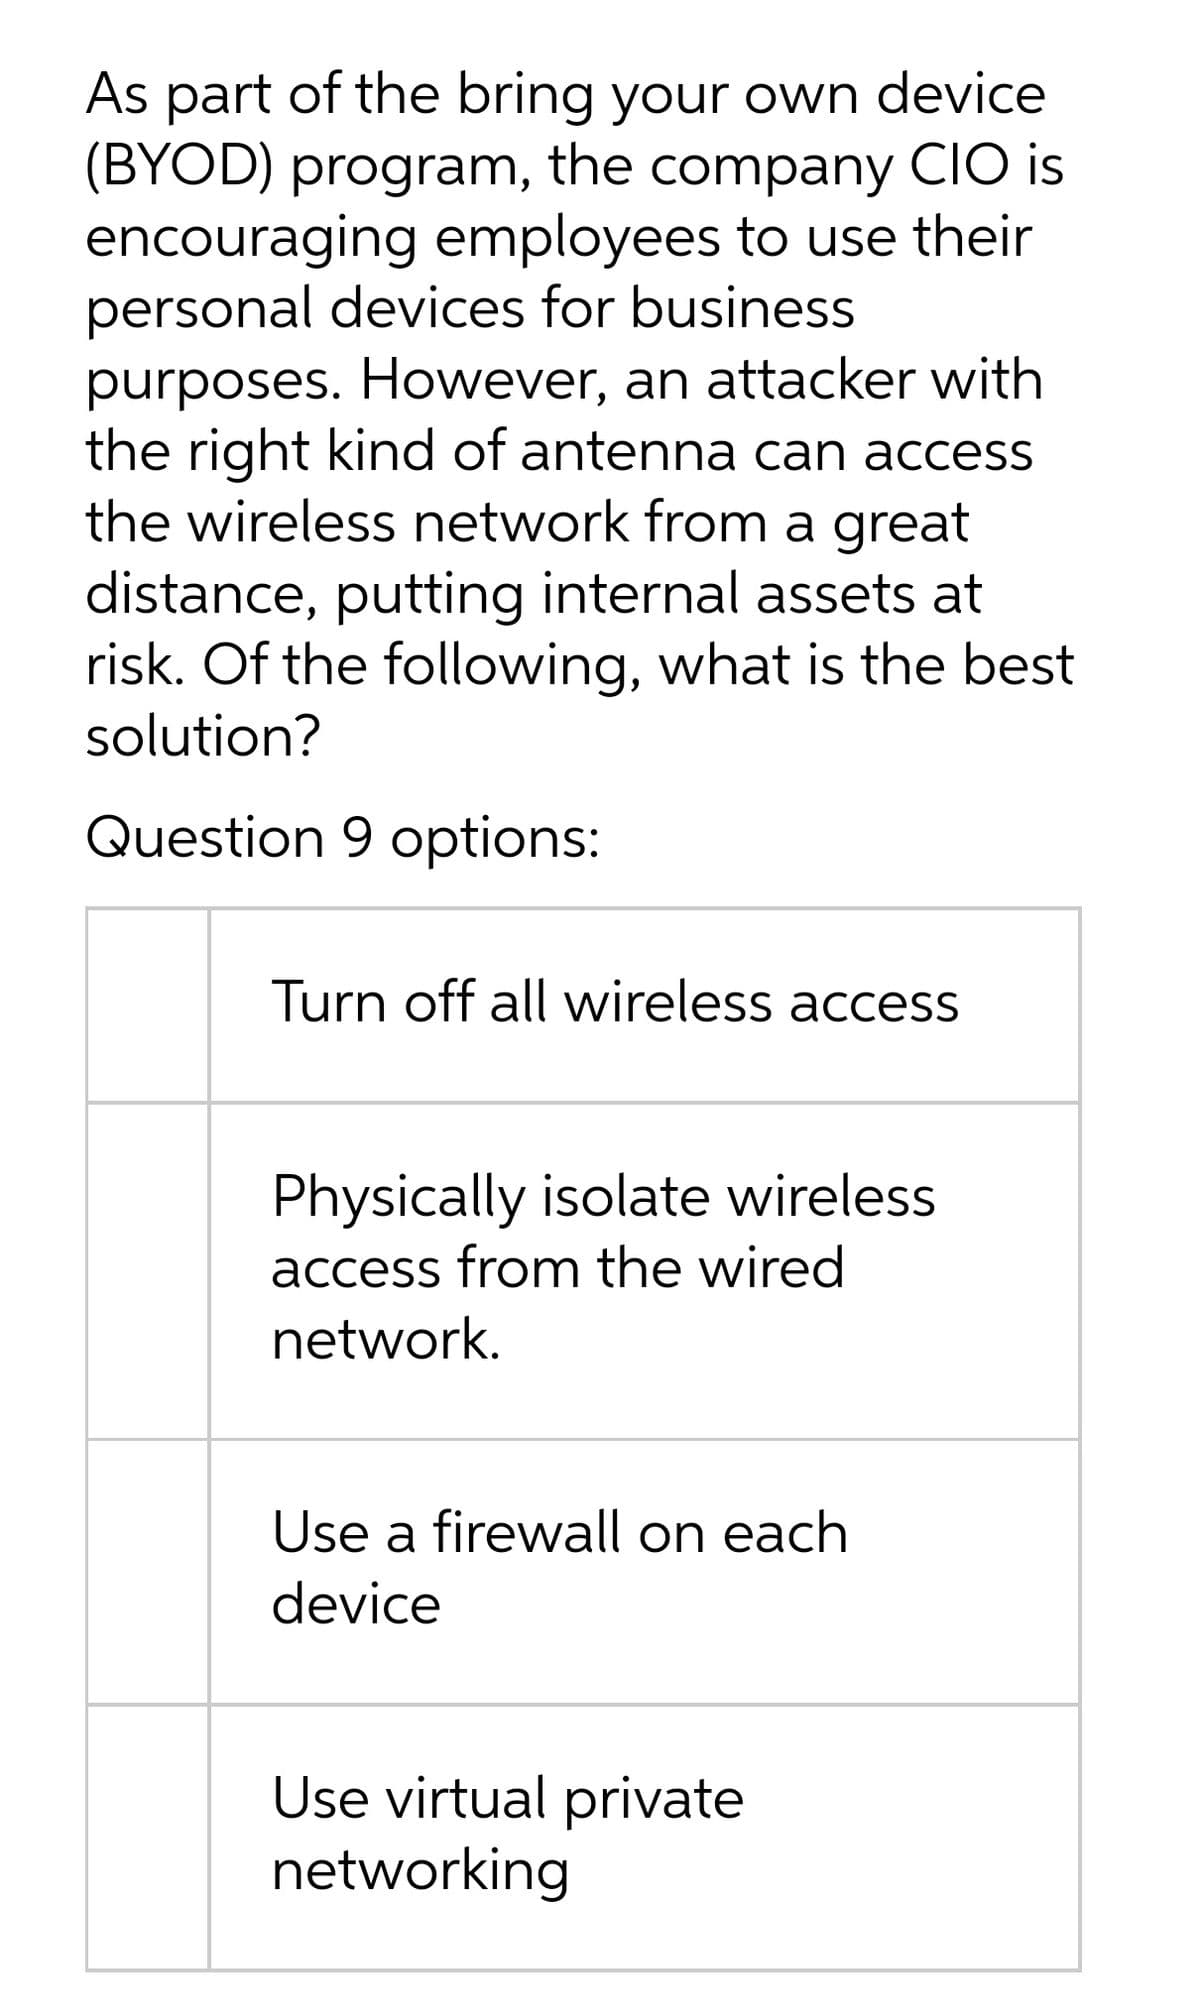 As part of the bring your own device
(BYOD) program, the company CIO is
encouraging employees to use their
personal devices for business
purposes. However, an attacker with
the right kind of antenna can access
the wireless network from a great
distance, putting internal assets at
risk. Of the following, what is the best
solution?
Question 9 options:
Turn off all wireless access
Physically isolate wireless
access from the wired
network.
Use a firewall on each
device
Use virtual private
networking
